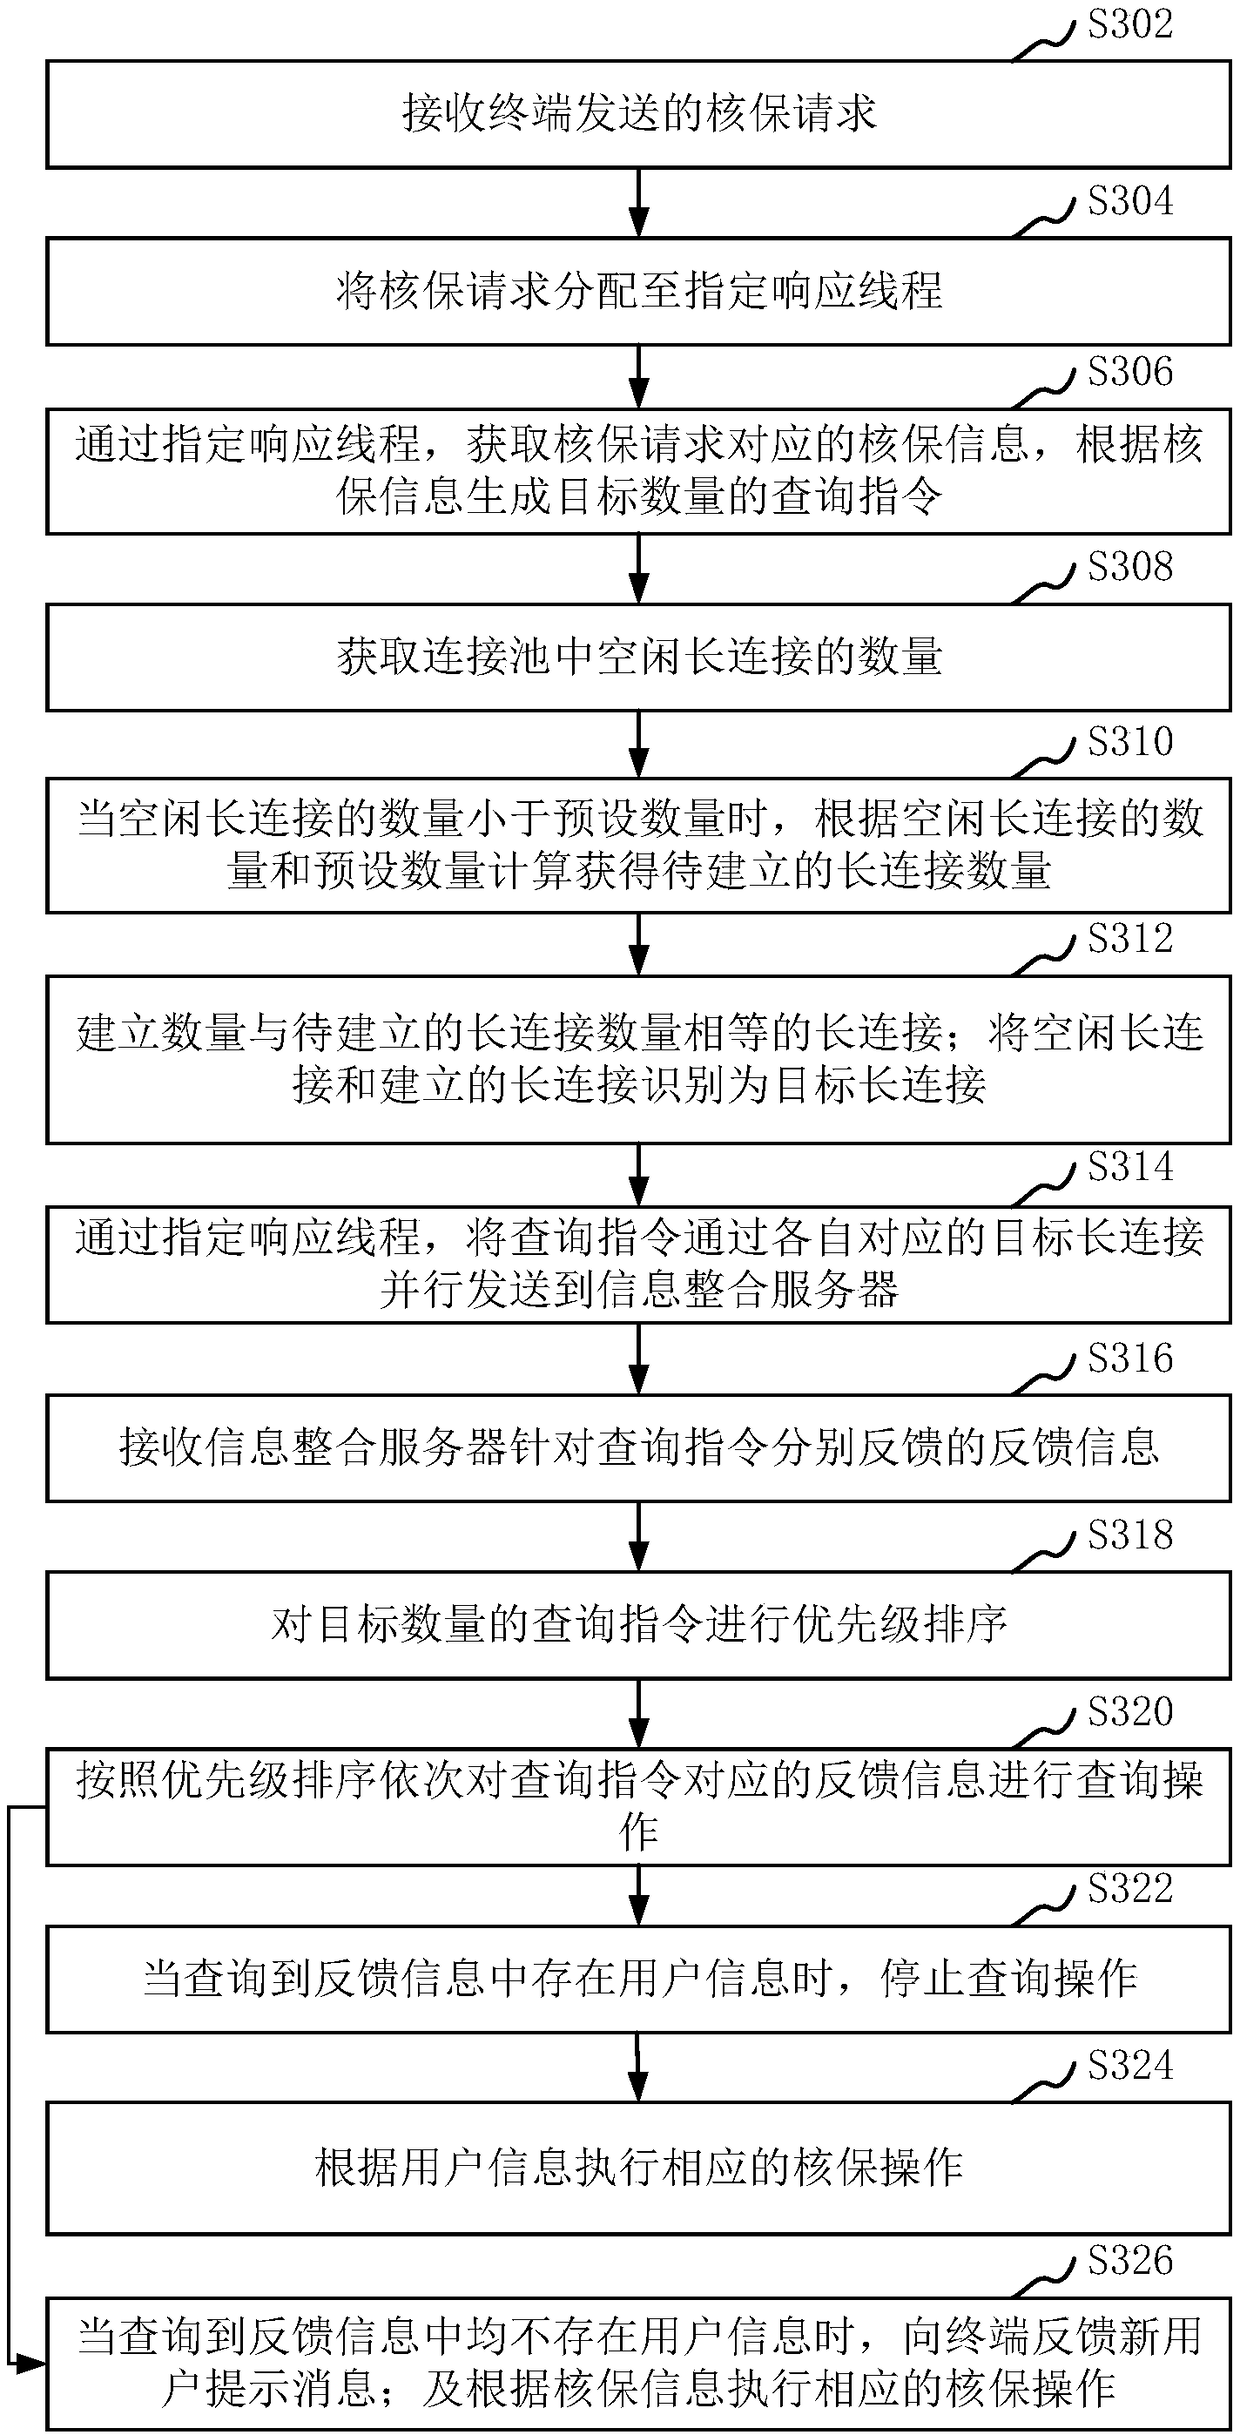 Underwriting request processing method and apparatus, computer device and storage medium